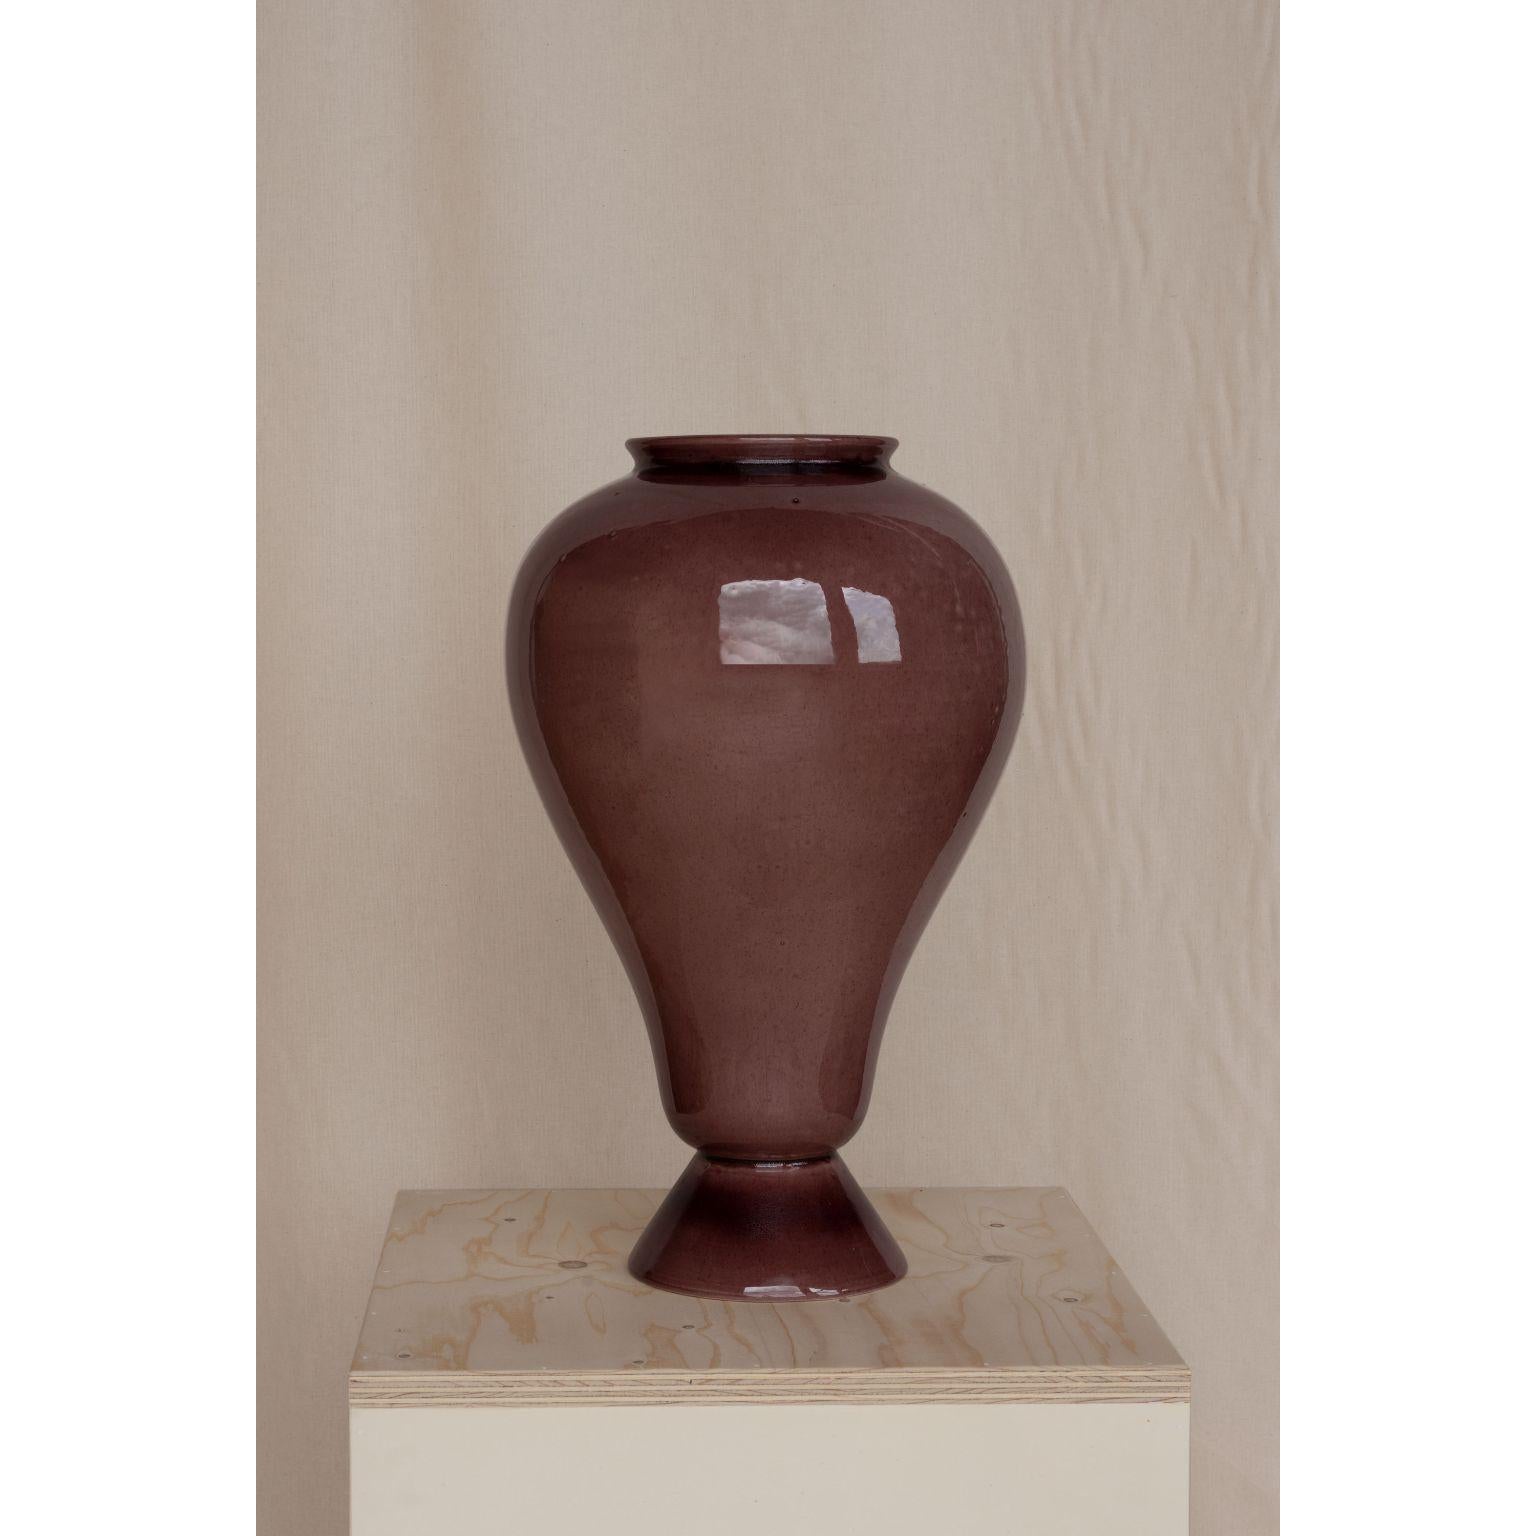 Epoca Ed.O. I by A. Vetra
Dimensions: Ø 28 x H 46 cm
Materials: Whity Clay.
One of a kind.

Epoca is a vase collection made with recycled clay and oxide finishing, whose textured objects, imperfect and poetic, play with shade and light.
Working with